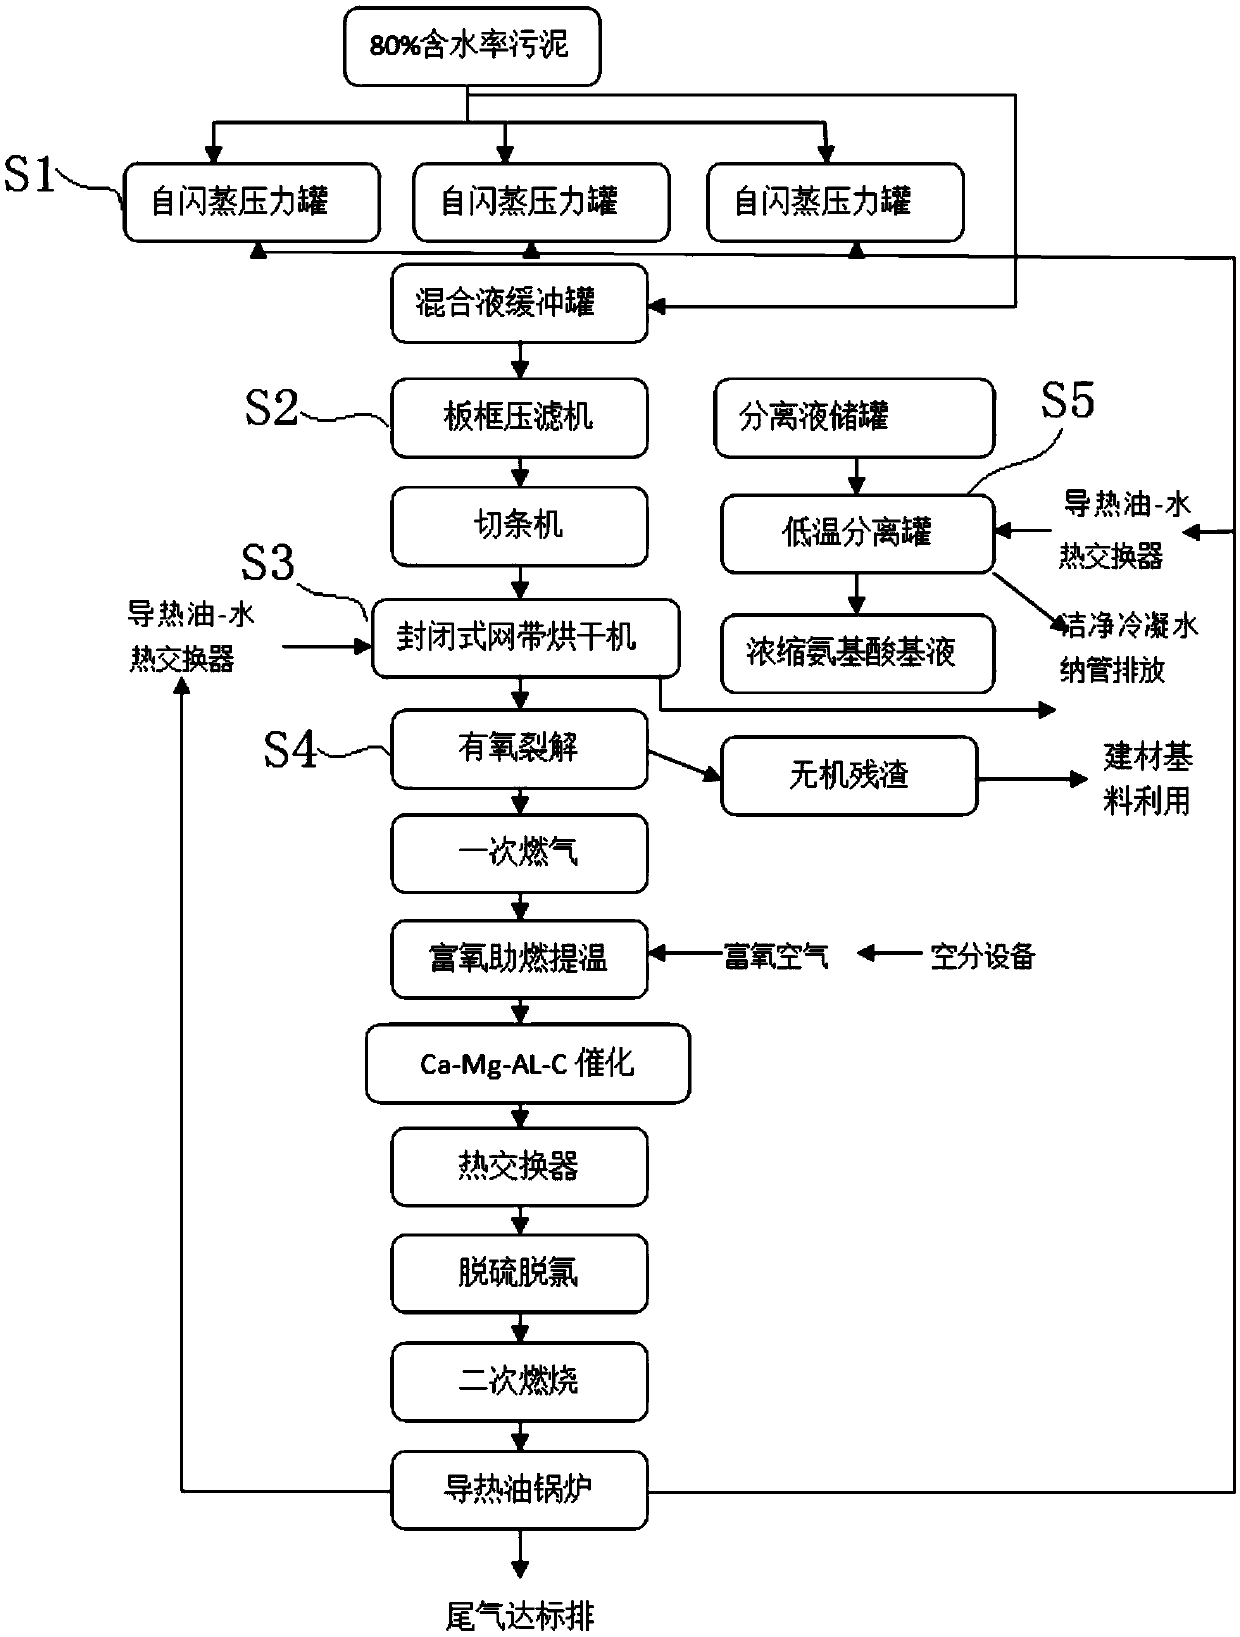 System for resource utilization and comprehensive treatment of organic sludge and treatment system of system